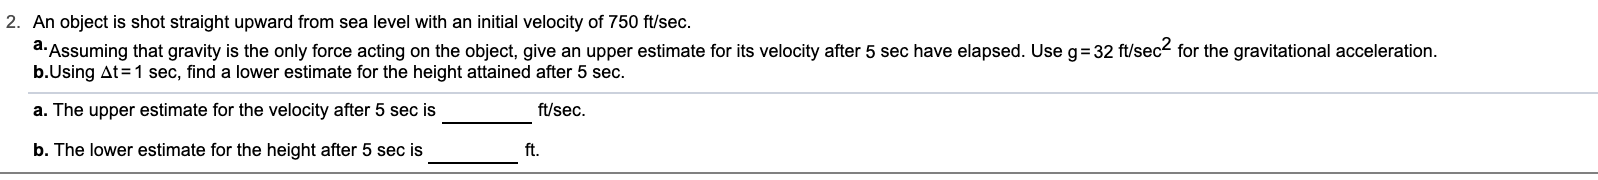 2. An object is shot straight upward from sea level with an initial velocity of 750 ft/sec.
a. Assuming that gravity is the only force acting on the object, give an upper estimate for its velocity after 5 sec have elapsed. Use g= 32 ft/sec- for the gravitational acceleration.
b.Using At=1 sec, find a lower estimate for the height attained after 5 sec.
a. The upper estimate for the velocity after 5 sec is
ft/sec.
b. The lower estimate for the height after 5 sec is
ft.
